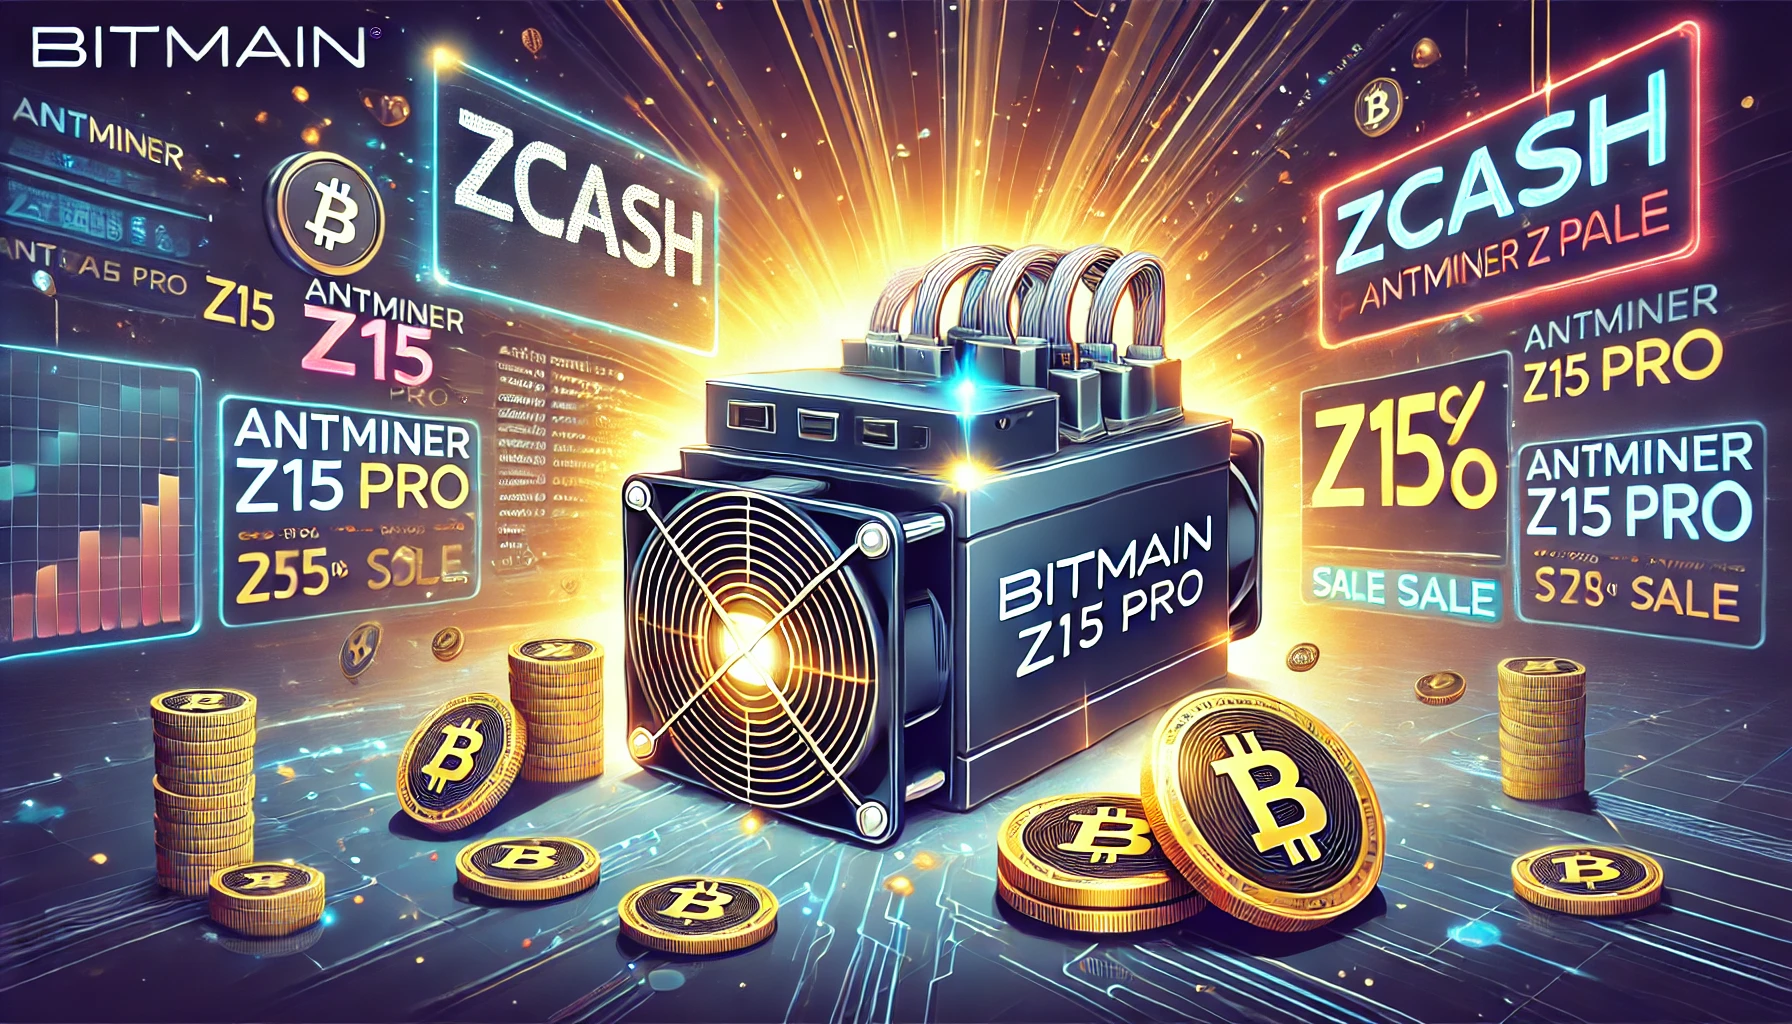 Bitmain Launches Spot Sale of ANTMINER Z15 Pro for Zcash Mining